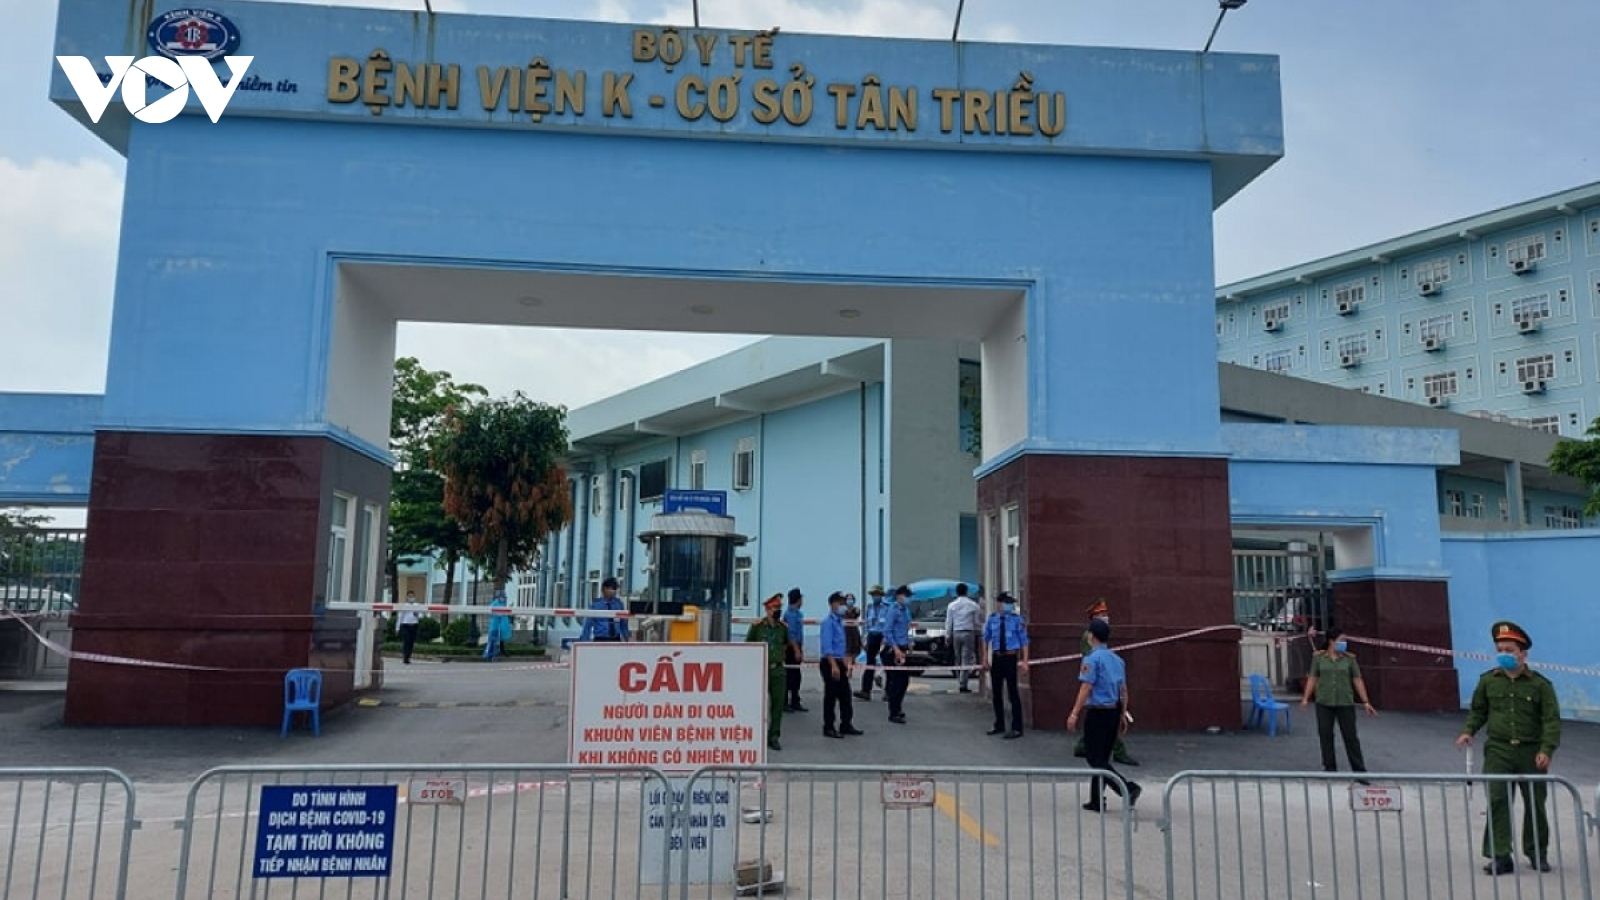 Another central hospital in Hanoi records local infections 